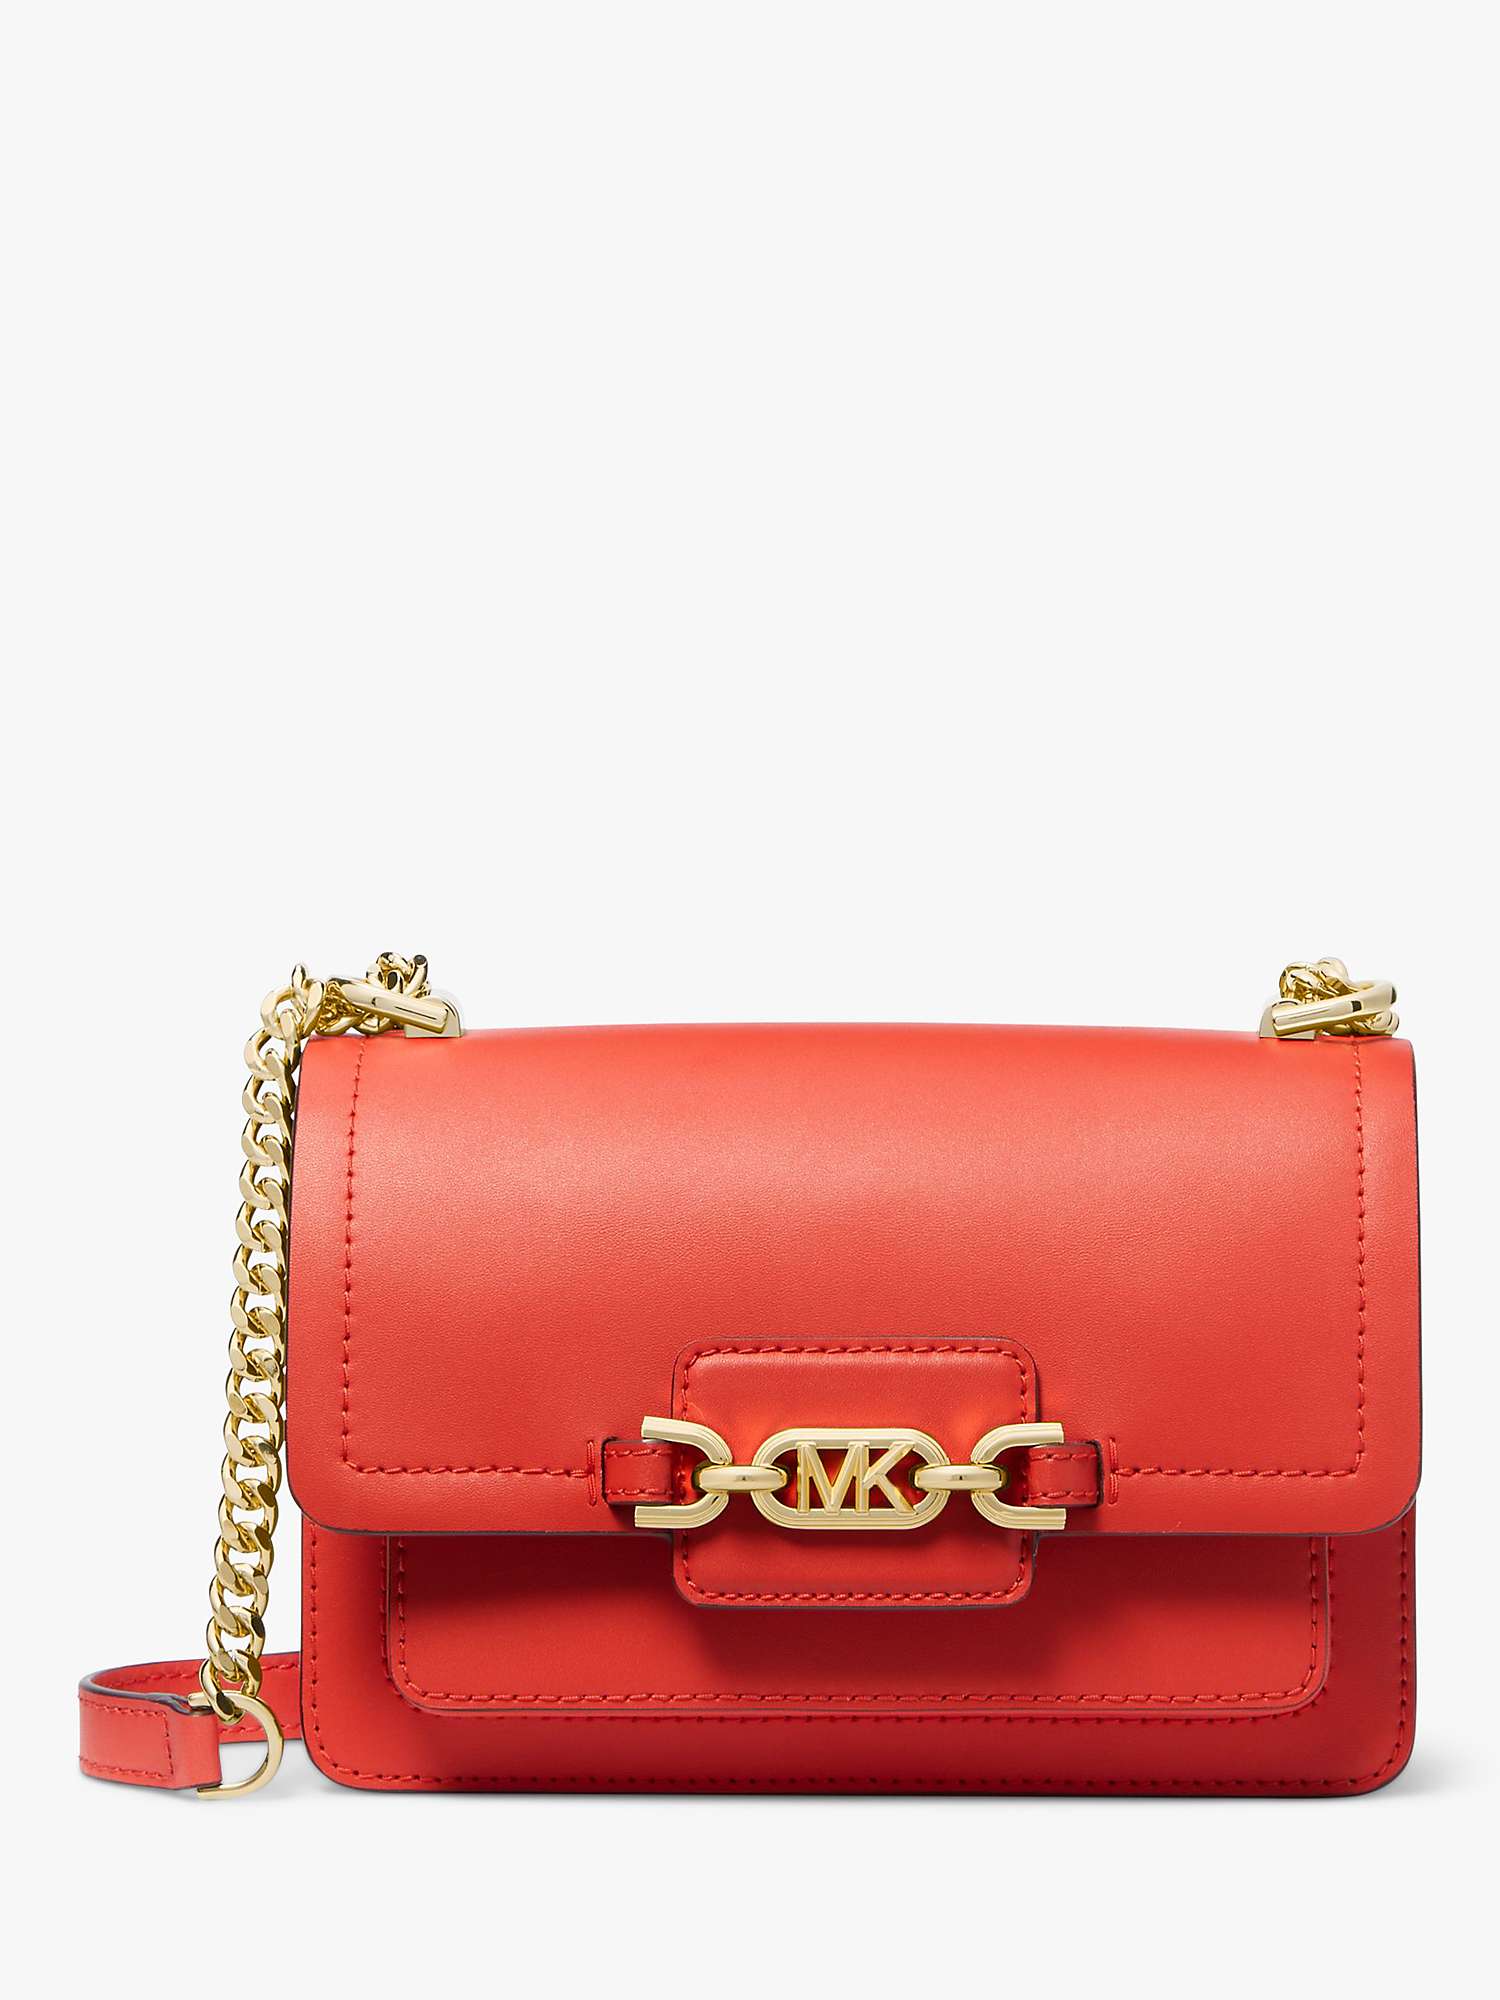 Buy Michael Kors Heather Small Leather Cross Body Bag, Spiced Coral Online at johnlewis.com